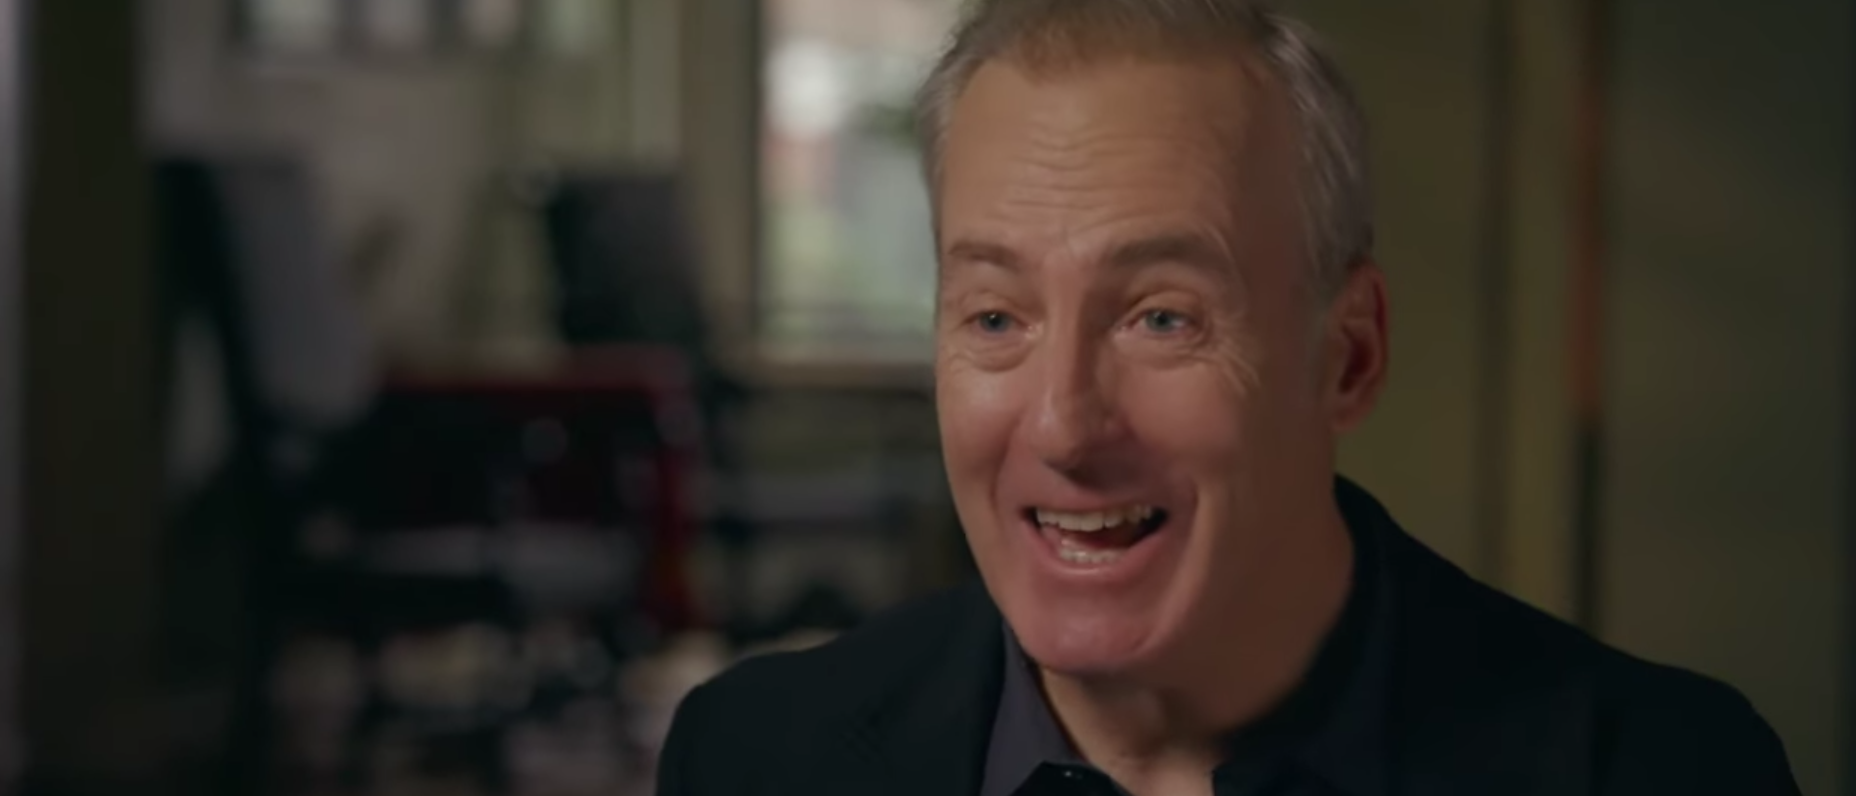 ‘That Is Crazy’: ‘Better Call Saul’ Star Bob Odenkirk Discovers He’s Related To King Charles III